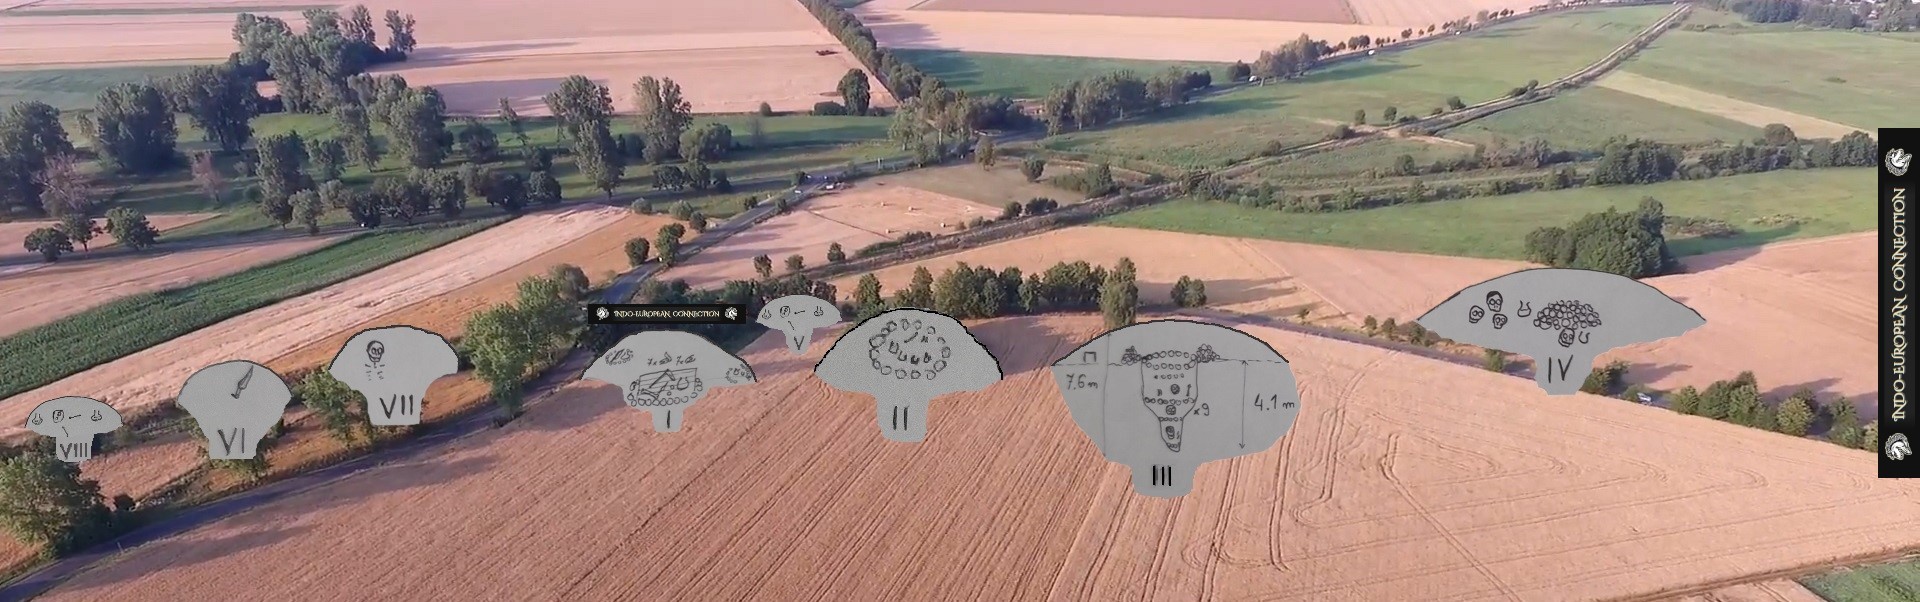 The aerial view of Unetice Culture cemetery in Łęki Małe, Poland with drawn details of artifacts found inside kurgans numbered from I to VIII